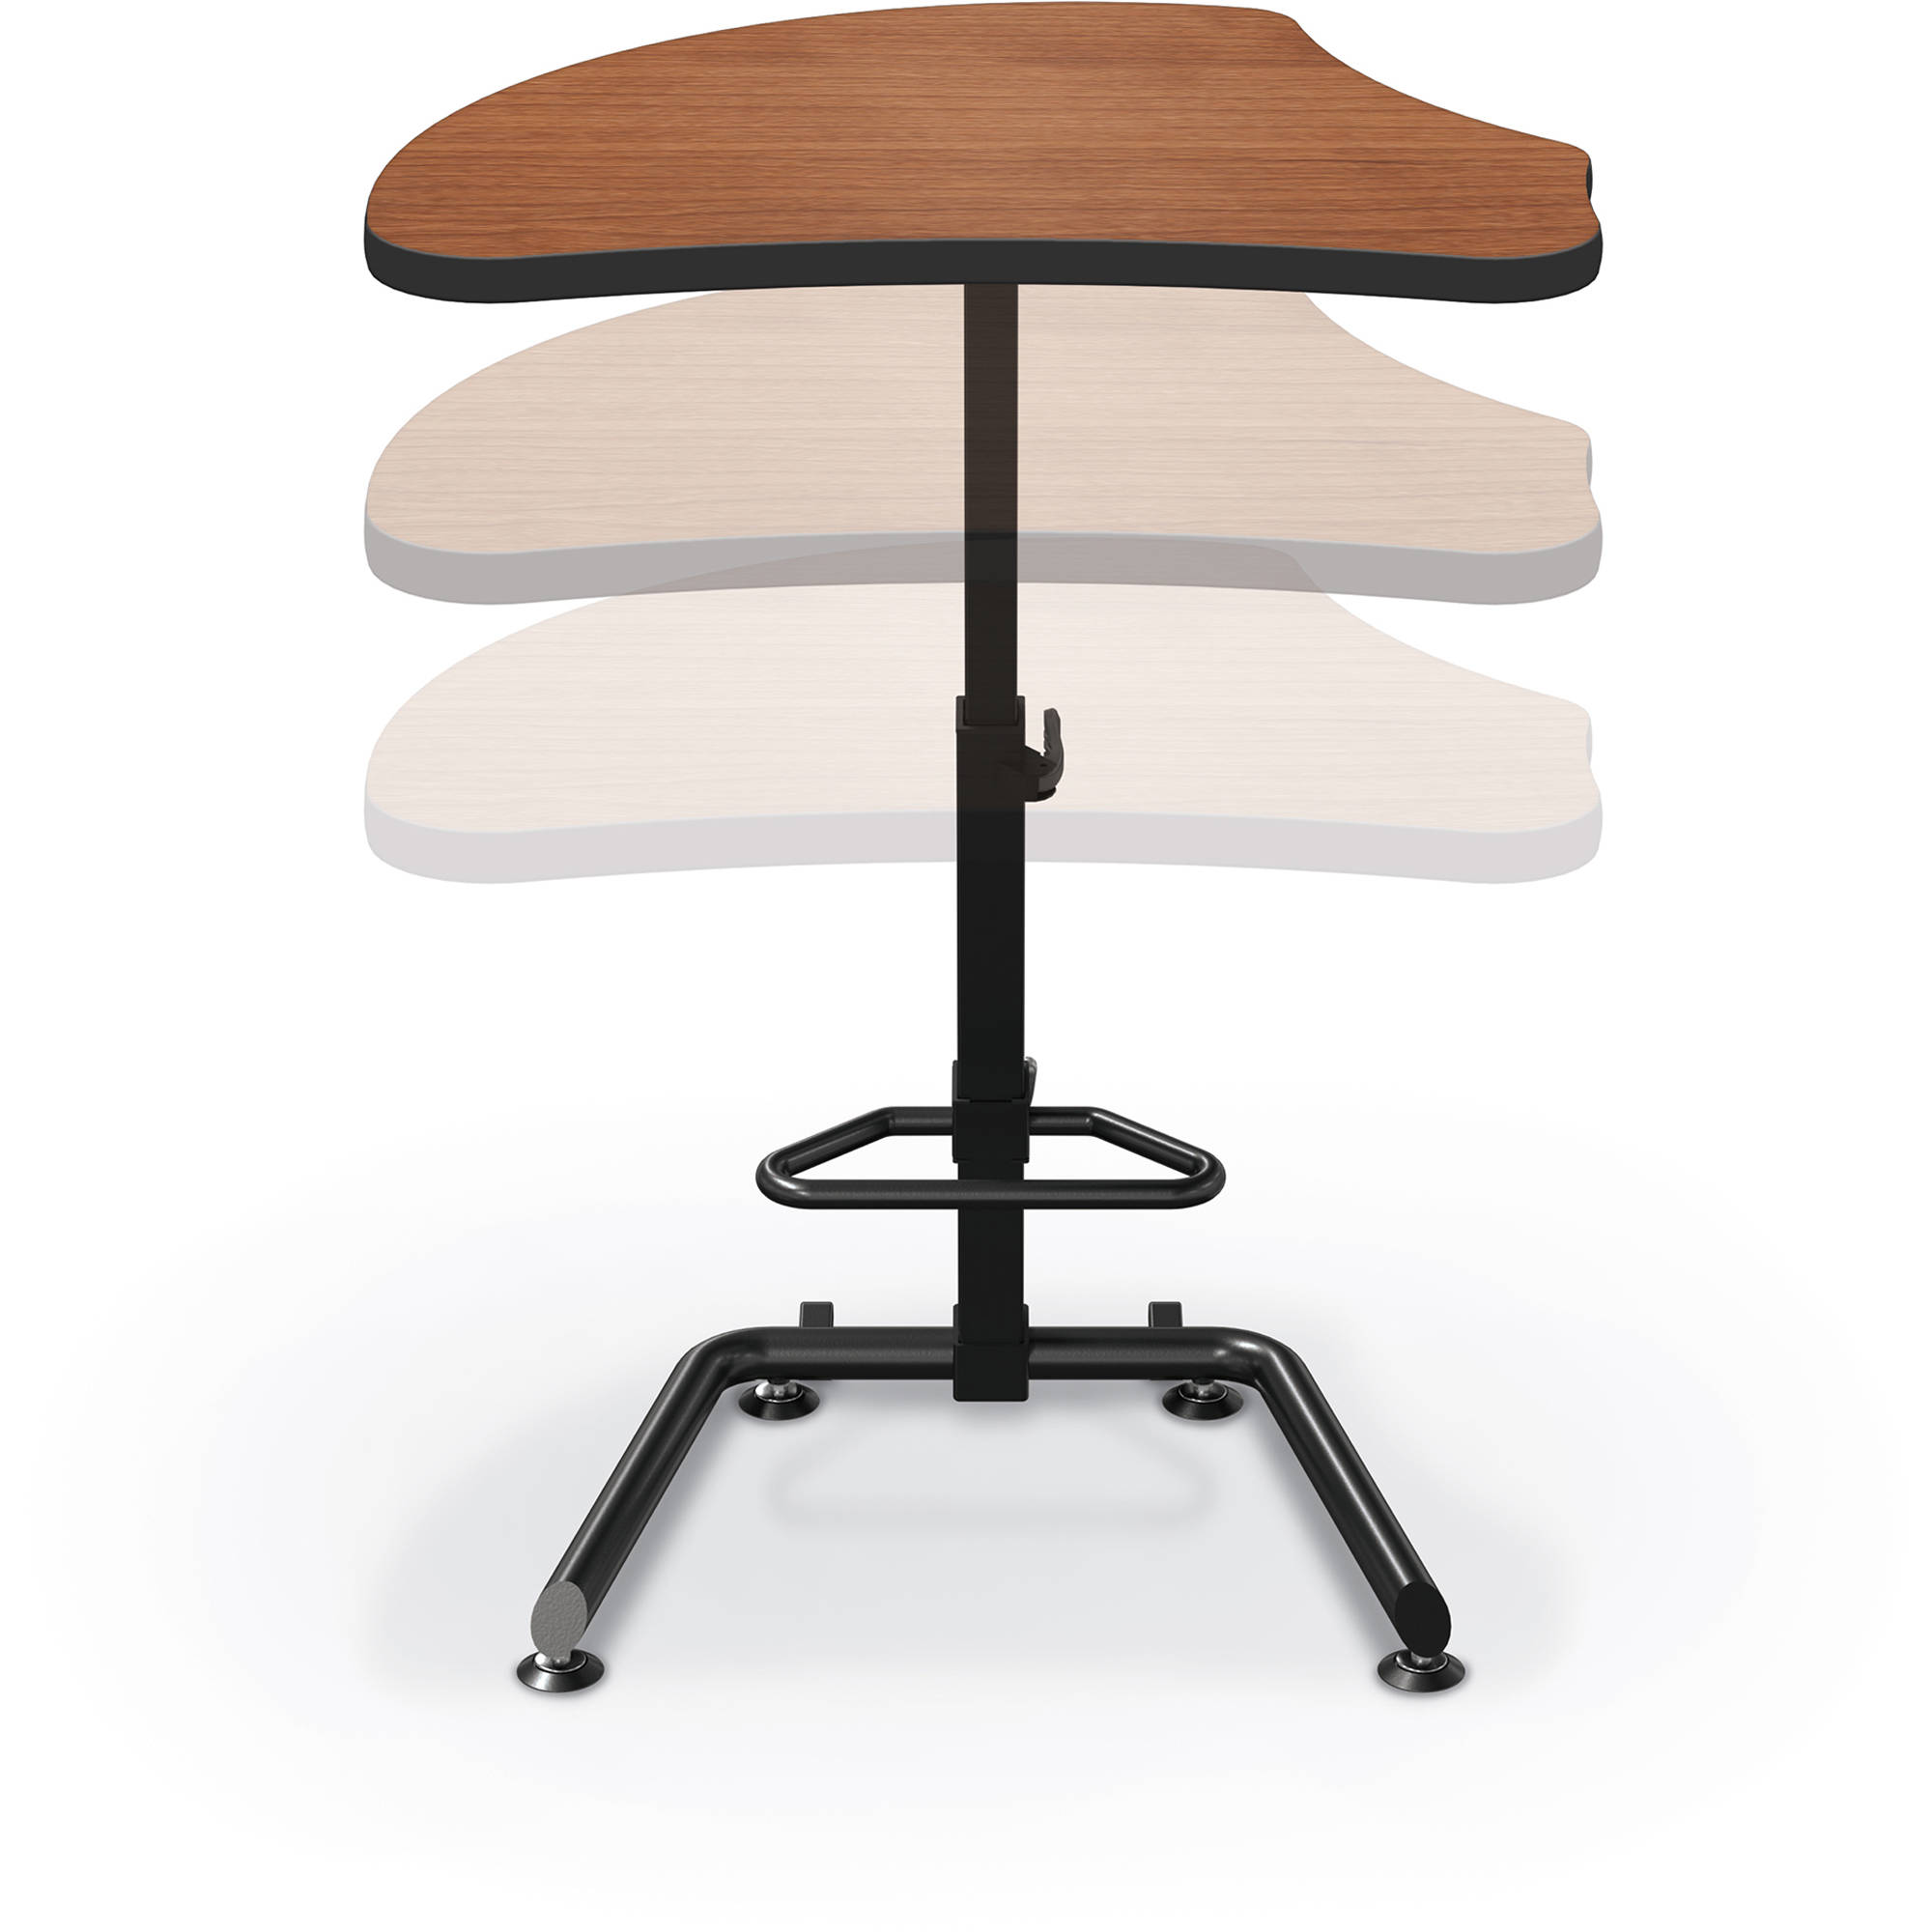 Balt Up Rite Harmony Height Adjustable Sit Stand 90532 G 7919 Pl